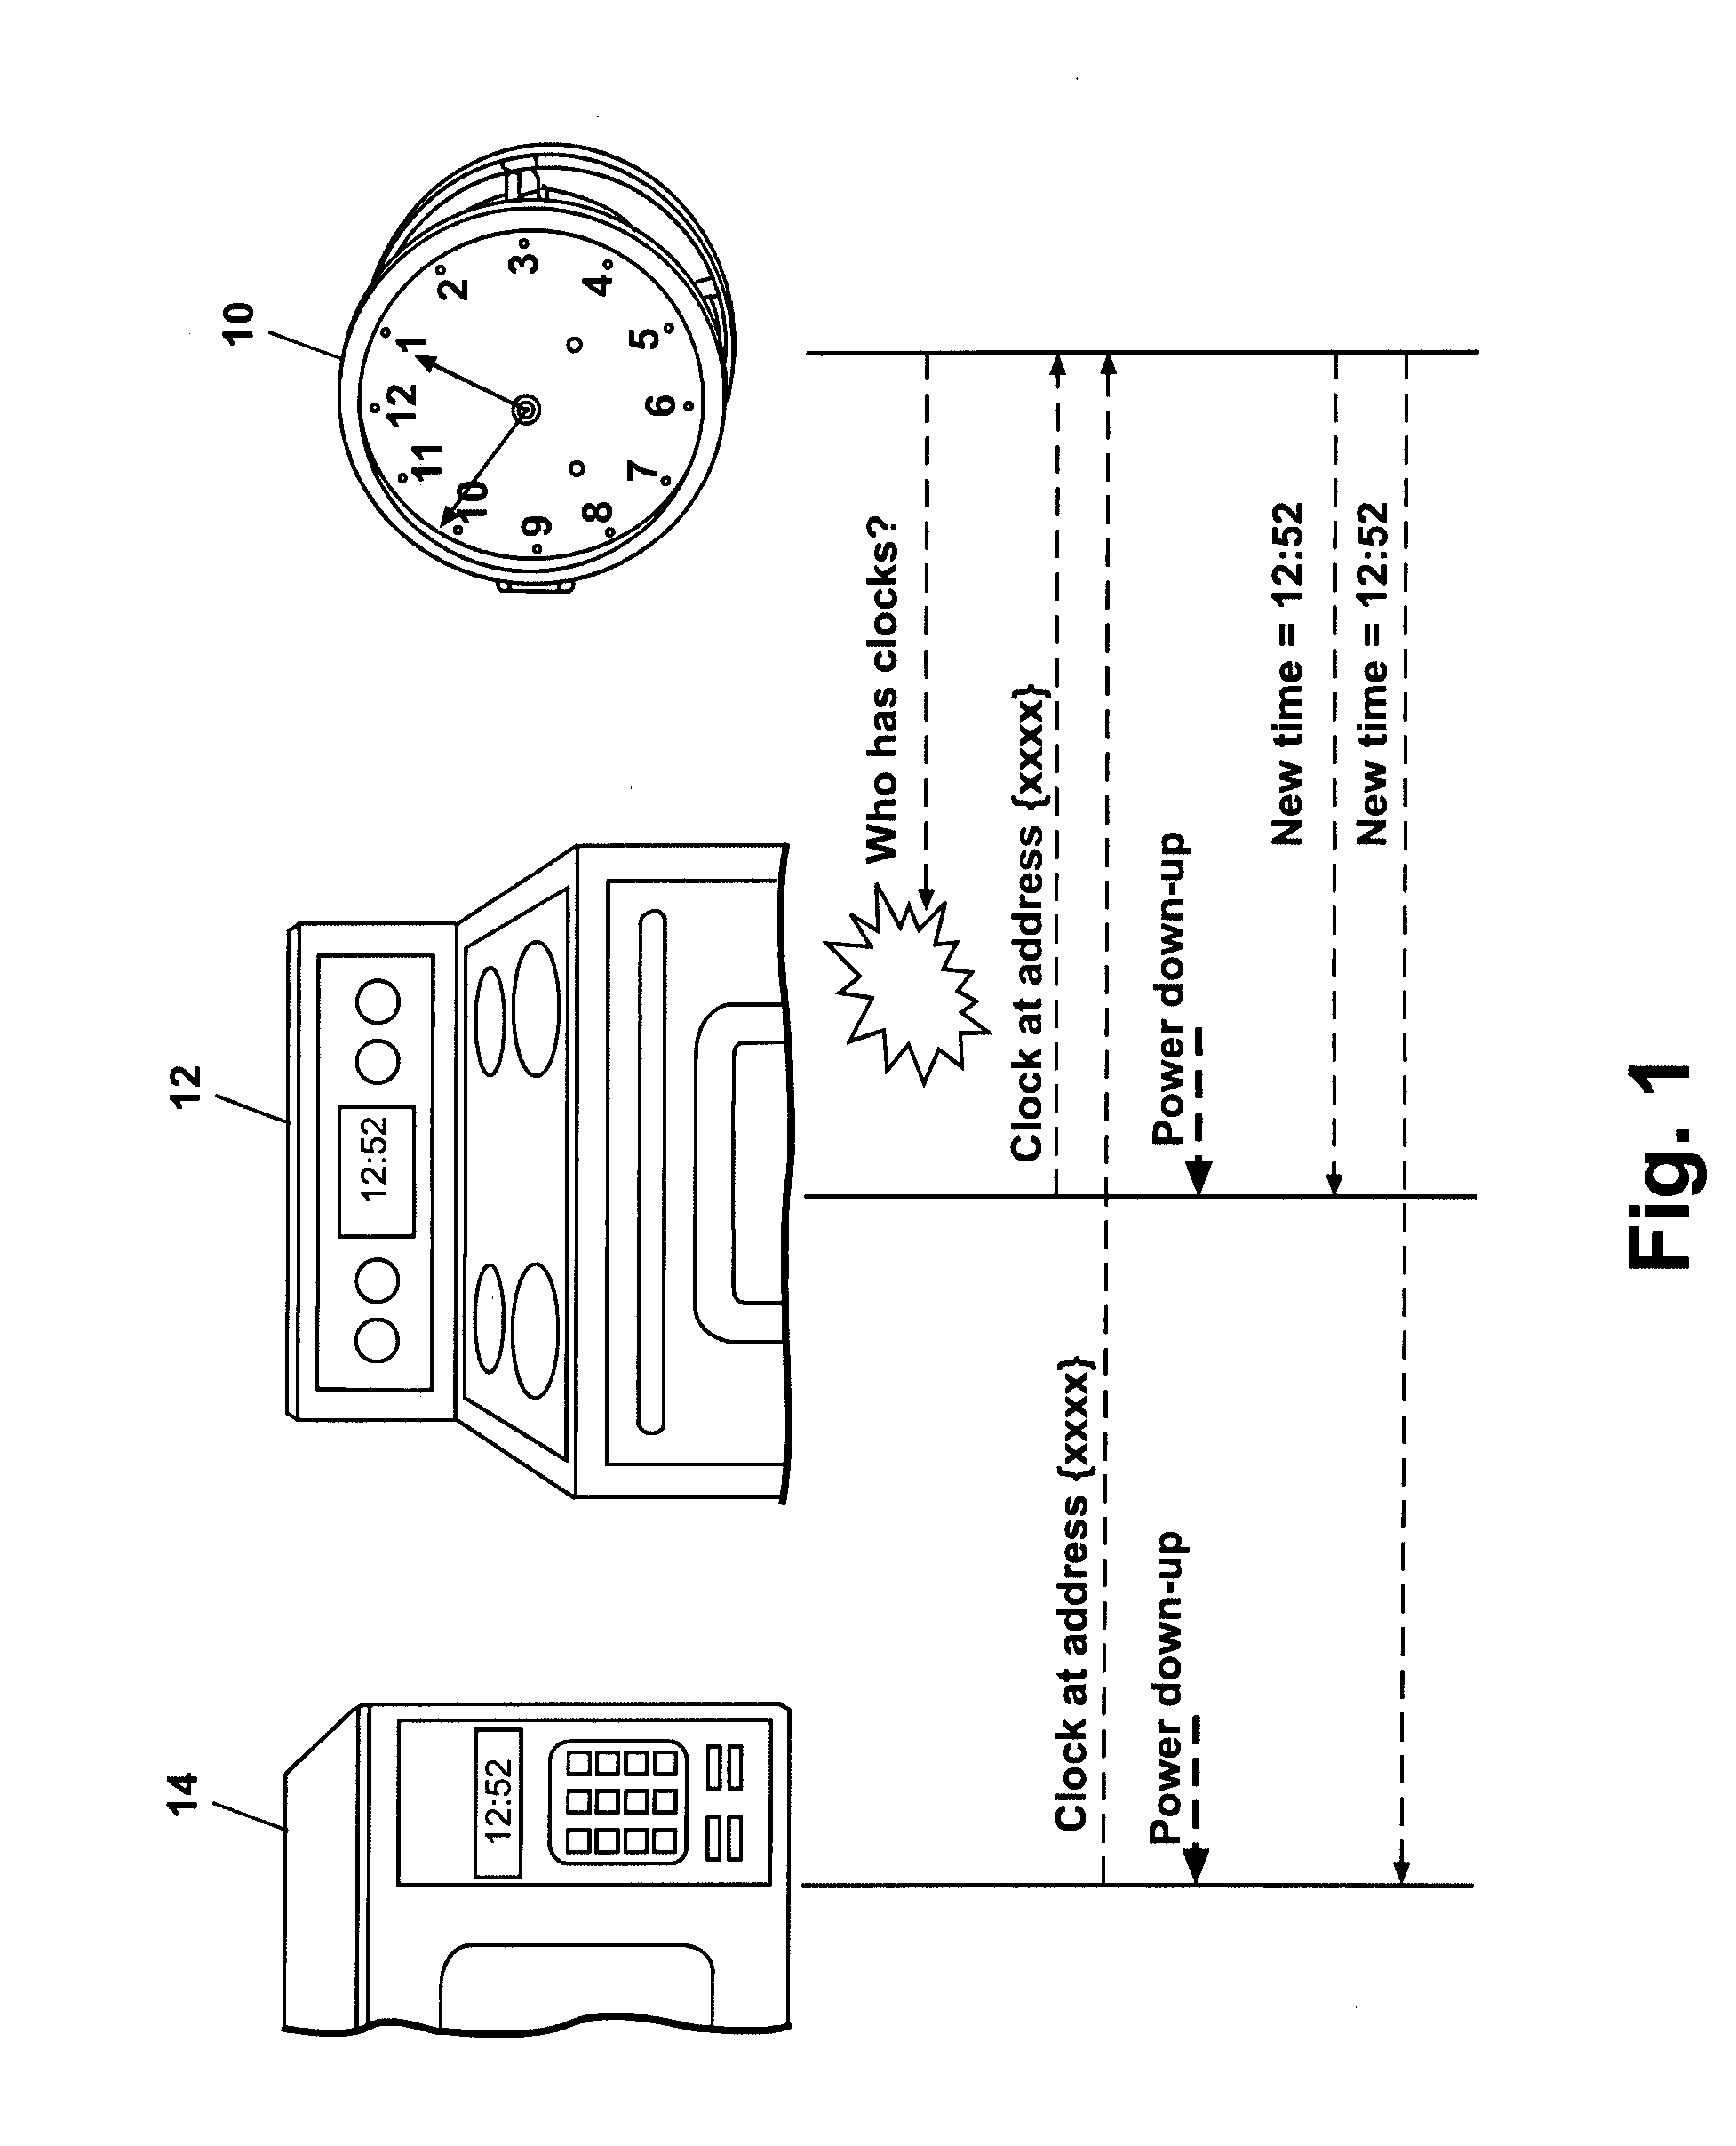 Network for changing resource consumption in an appliance